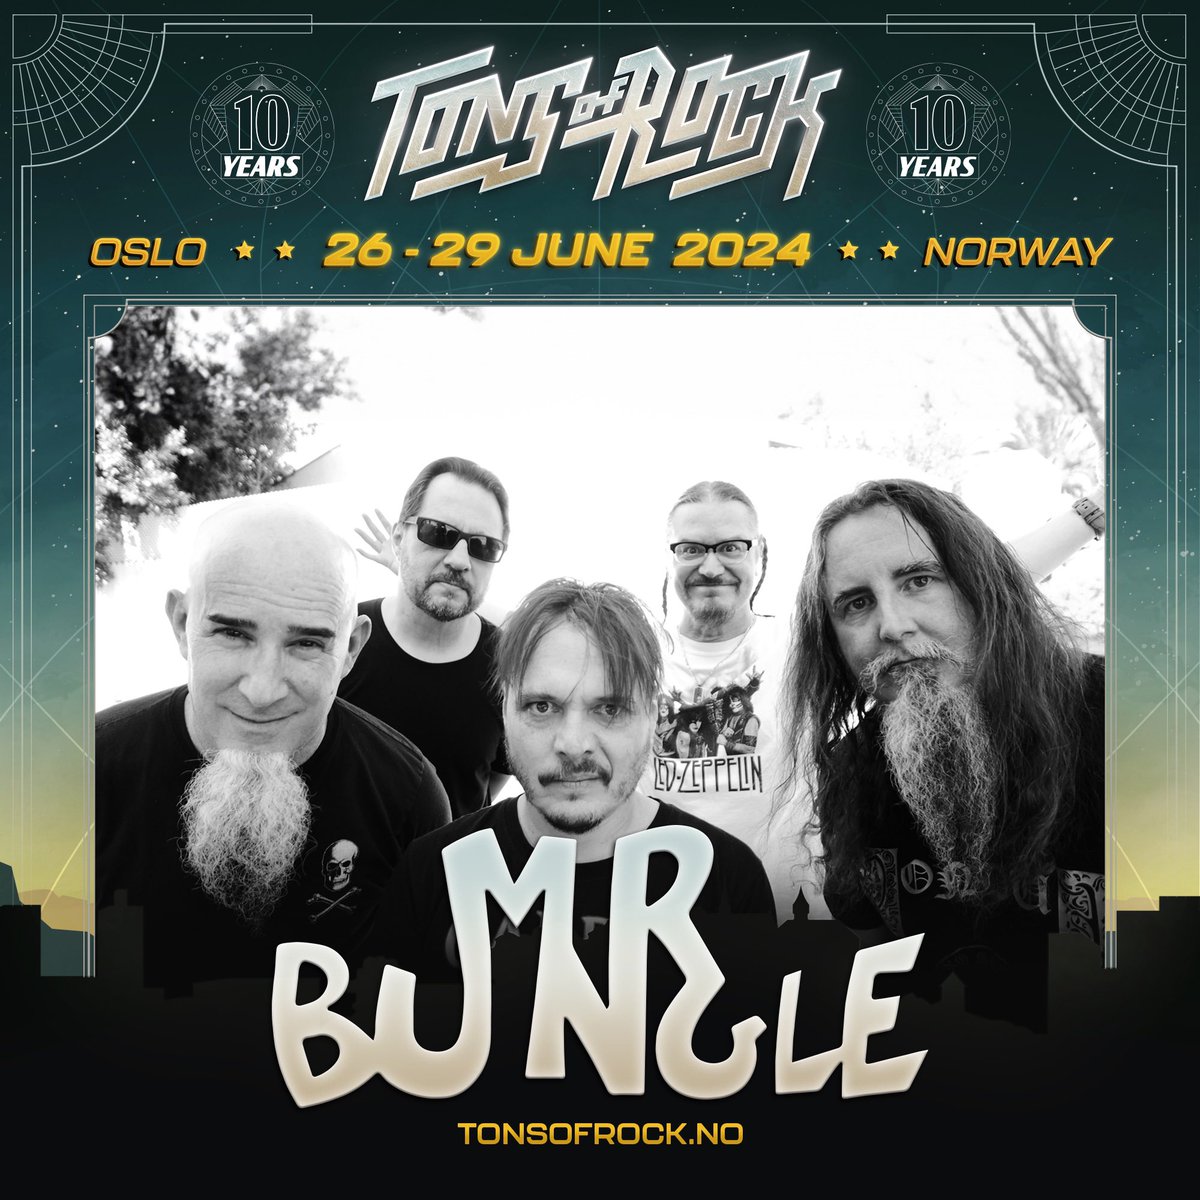 We see you Norway #TonsOfRock 

Catch us June 27th! tonsofrock.no